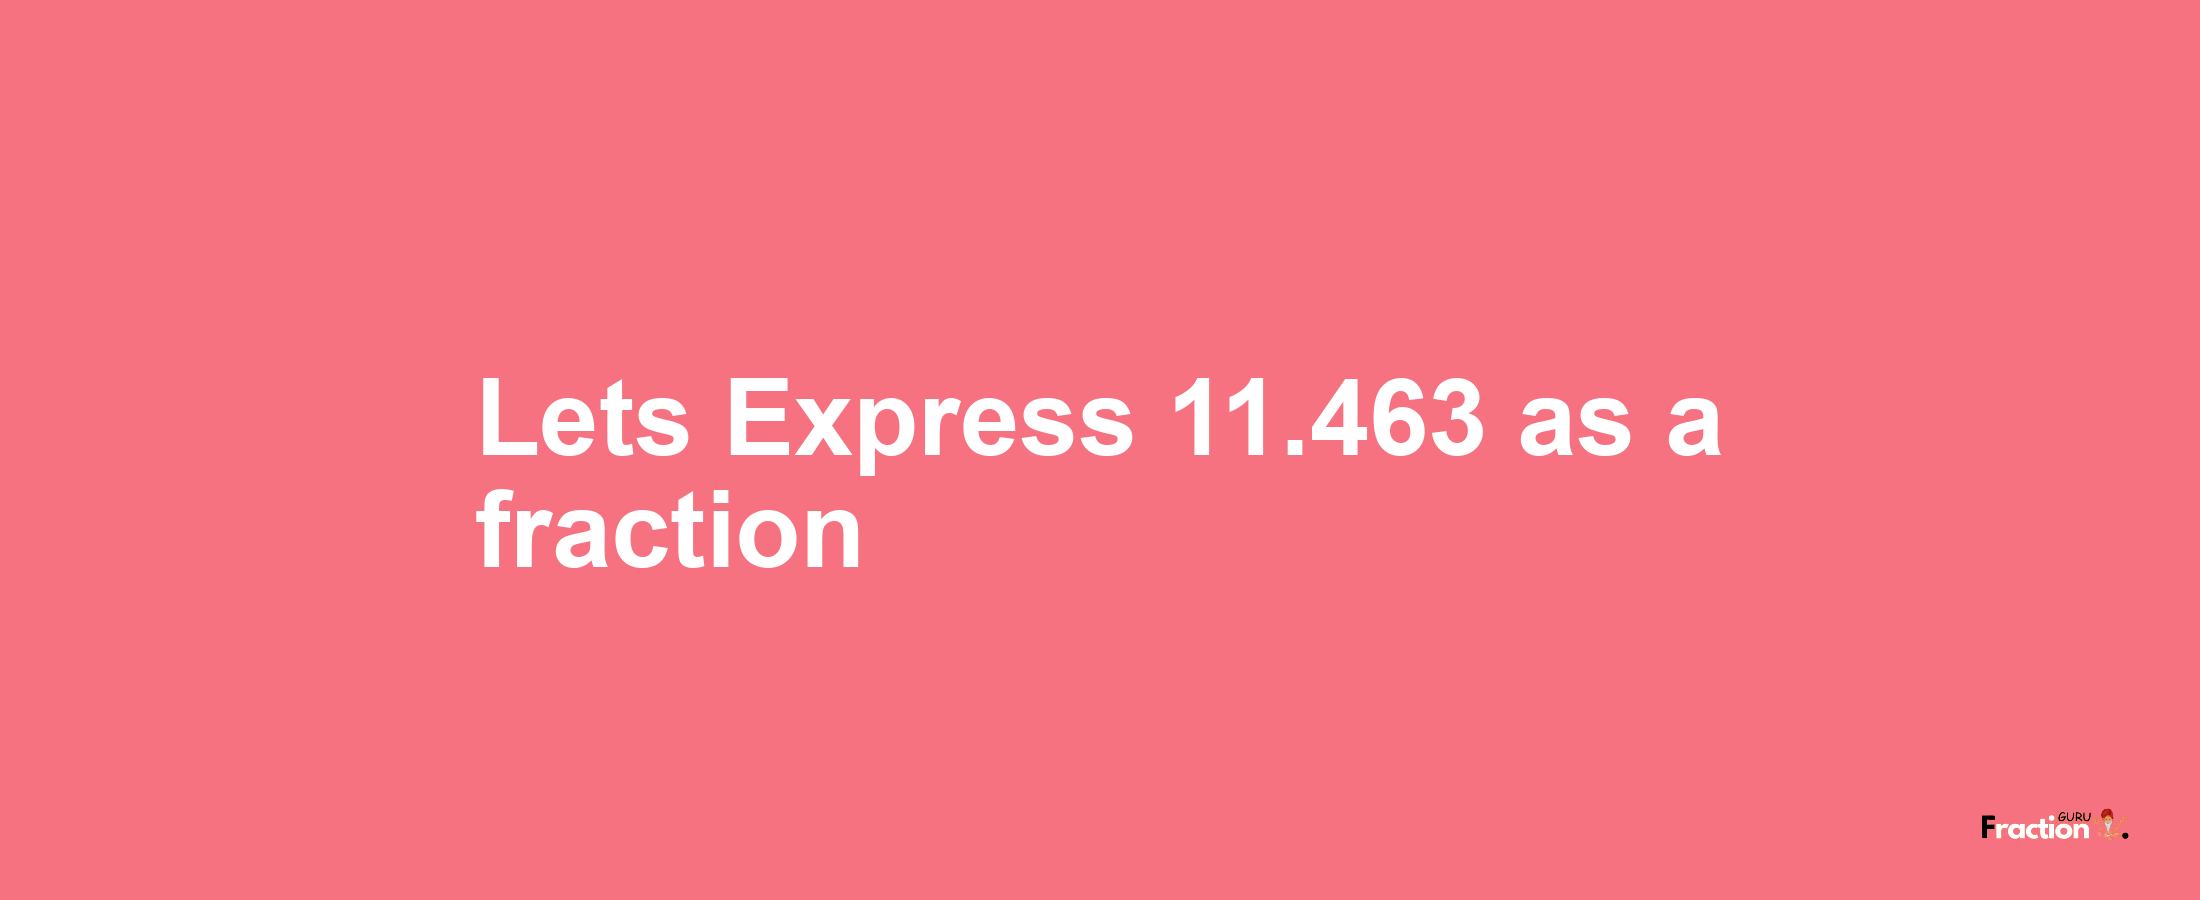 Lets Express 11.463 as afraction